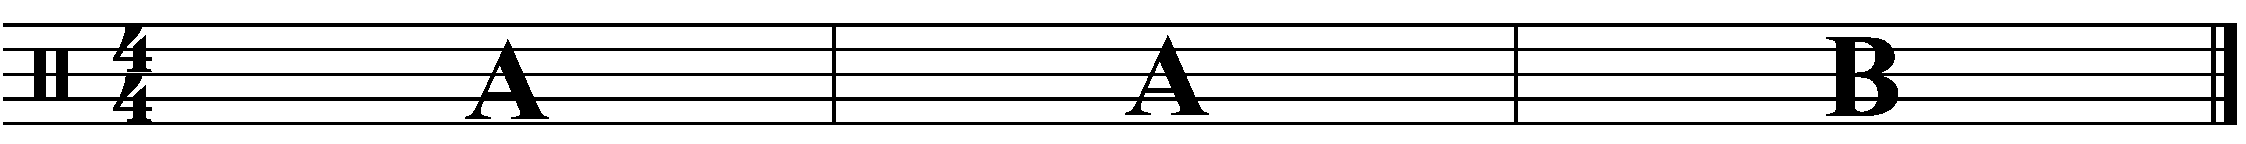 A three bar phrase made up of 2 lots of A followed by a B.